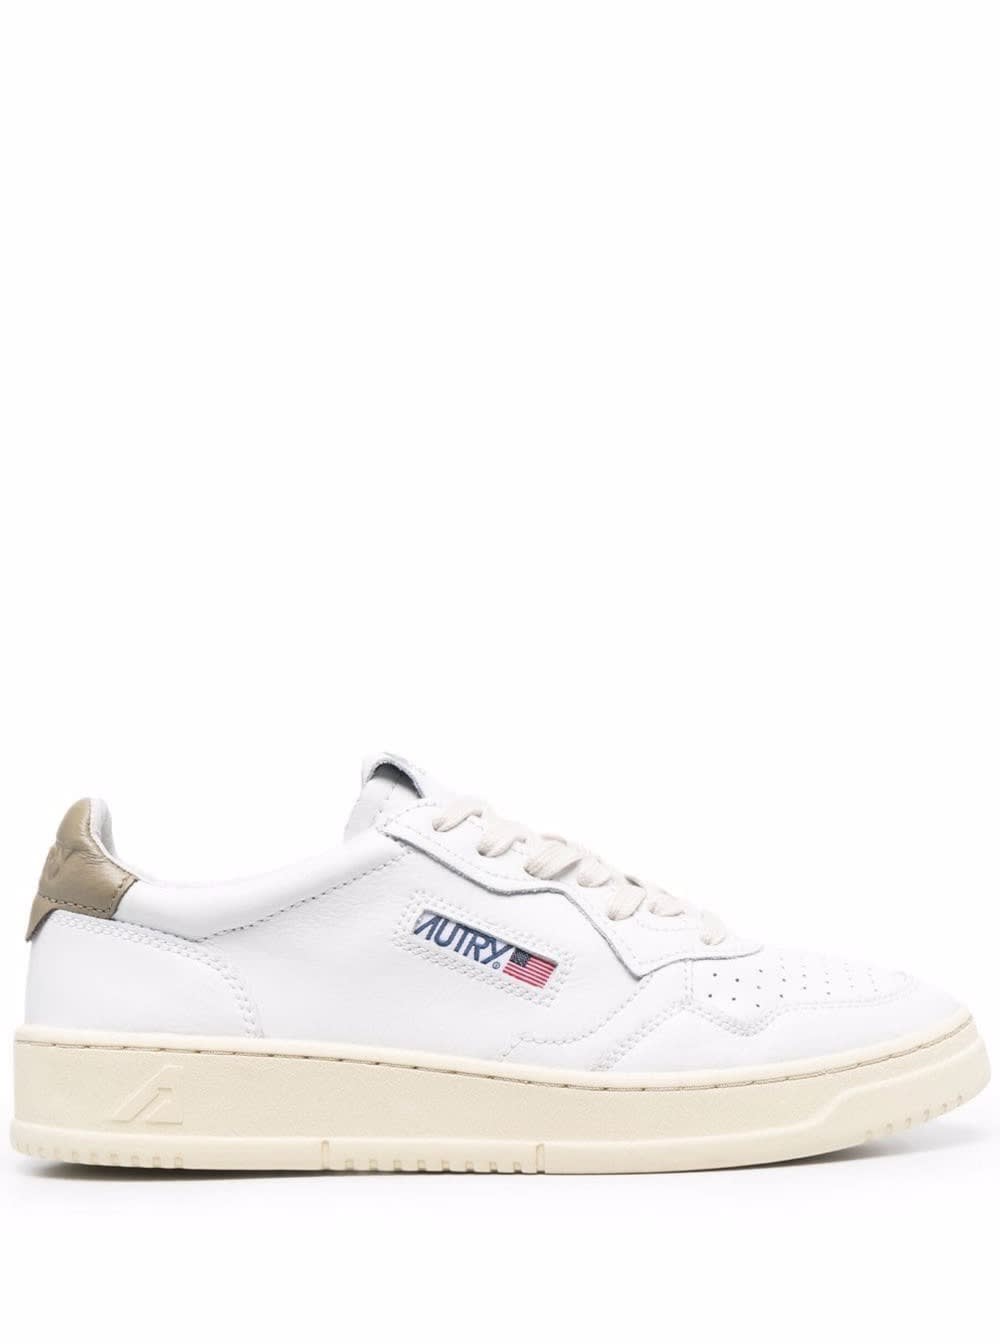 Autry Man Medialisti Leather White Sneakers